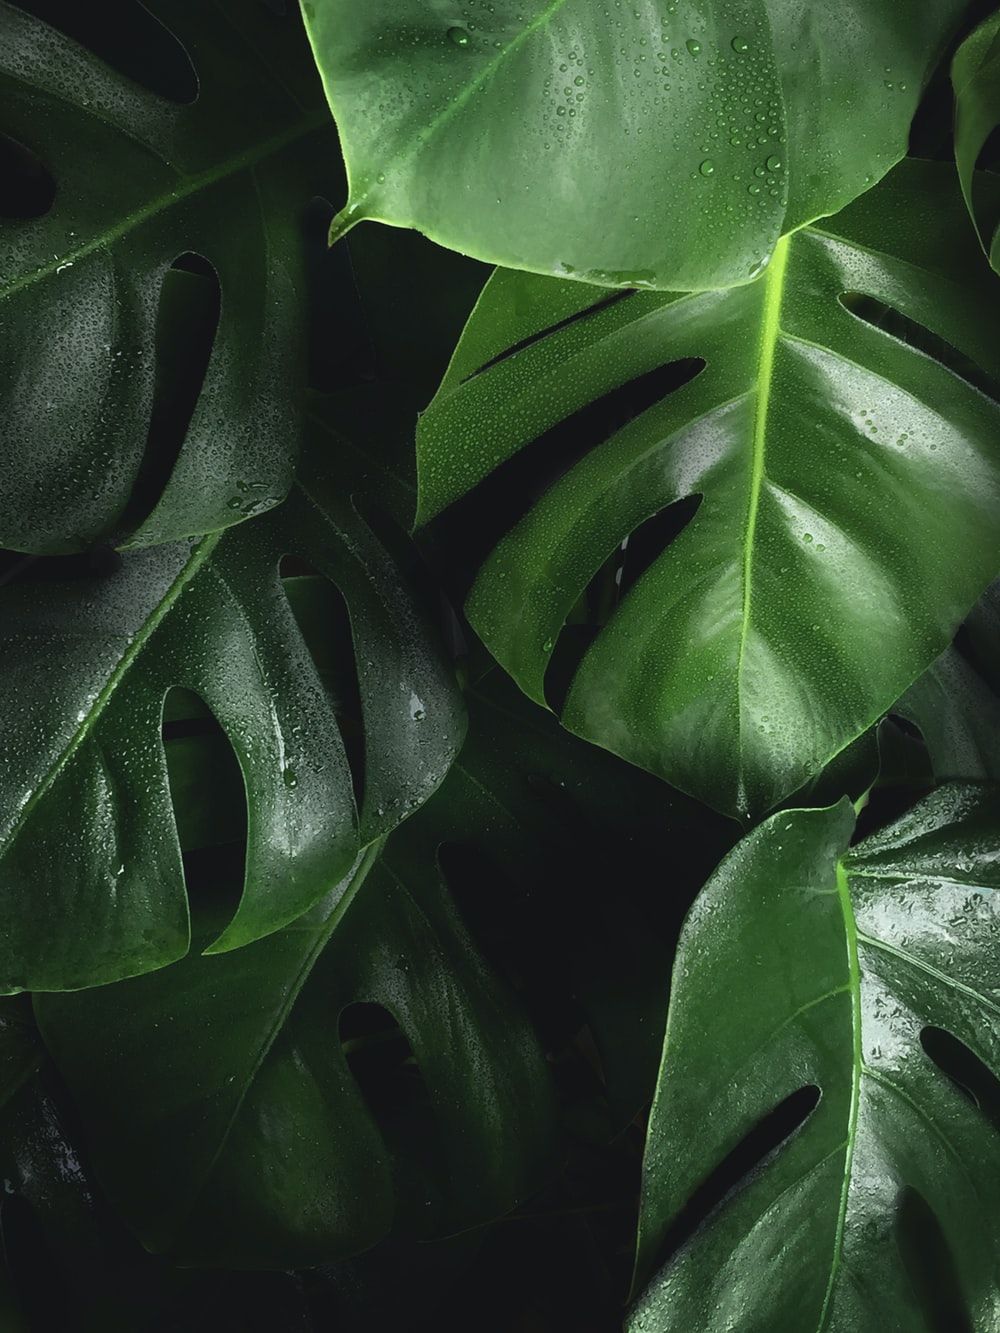 Tropical Leaf Picture. Download Free Image